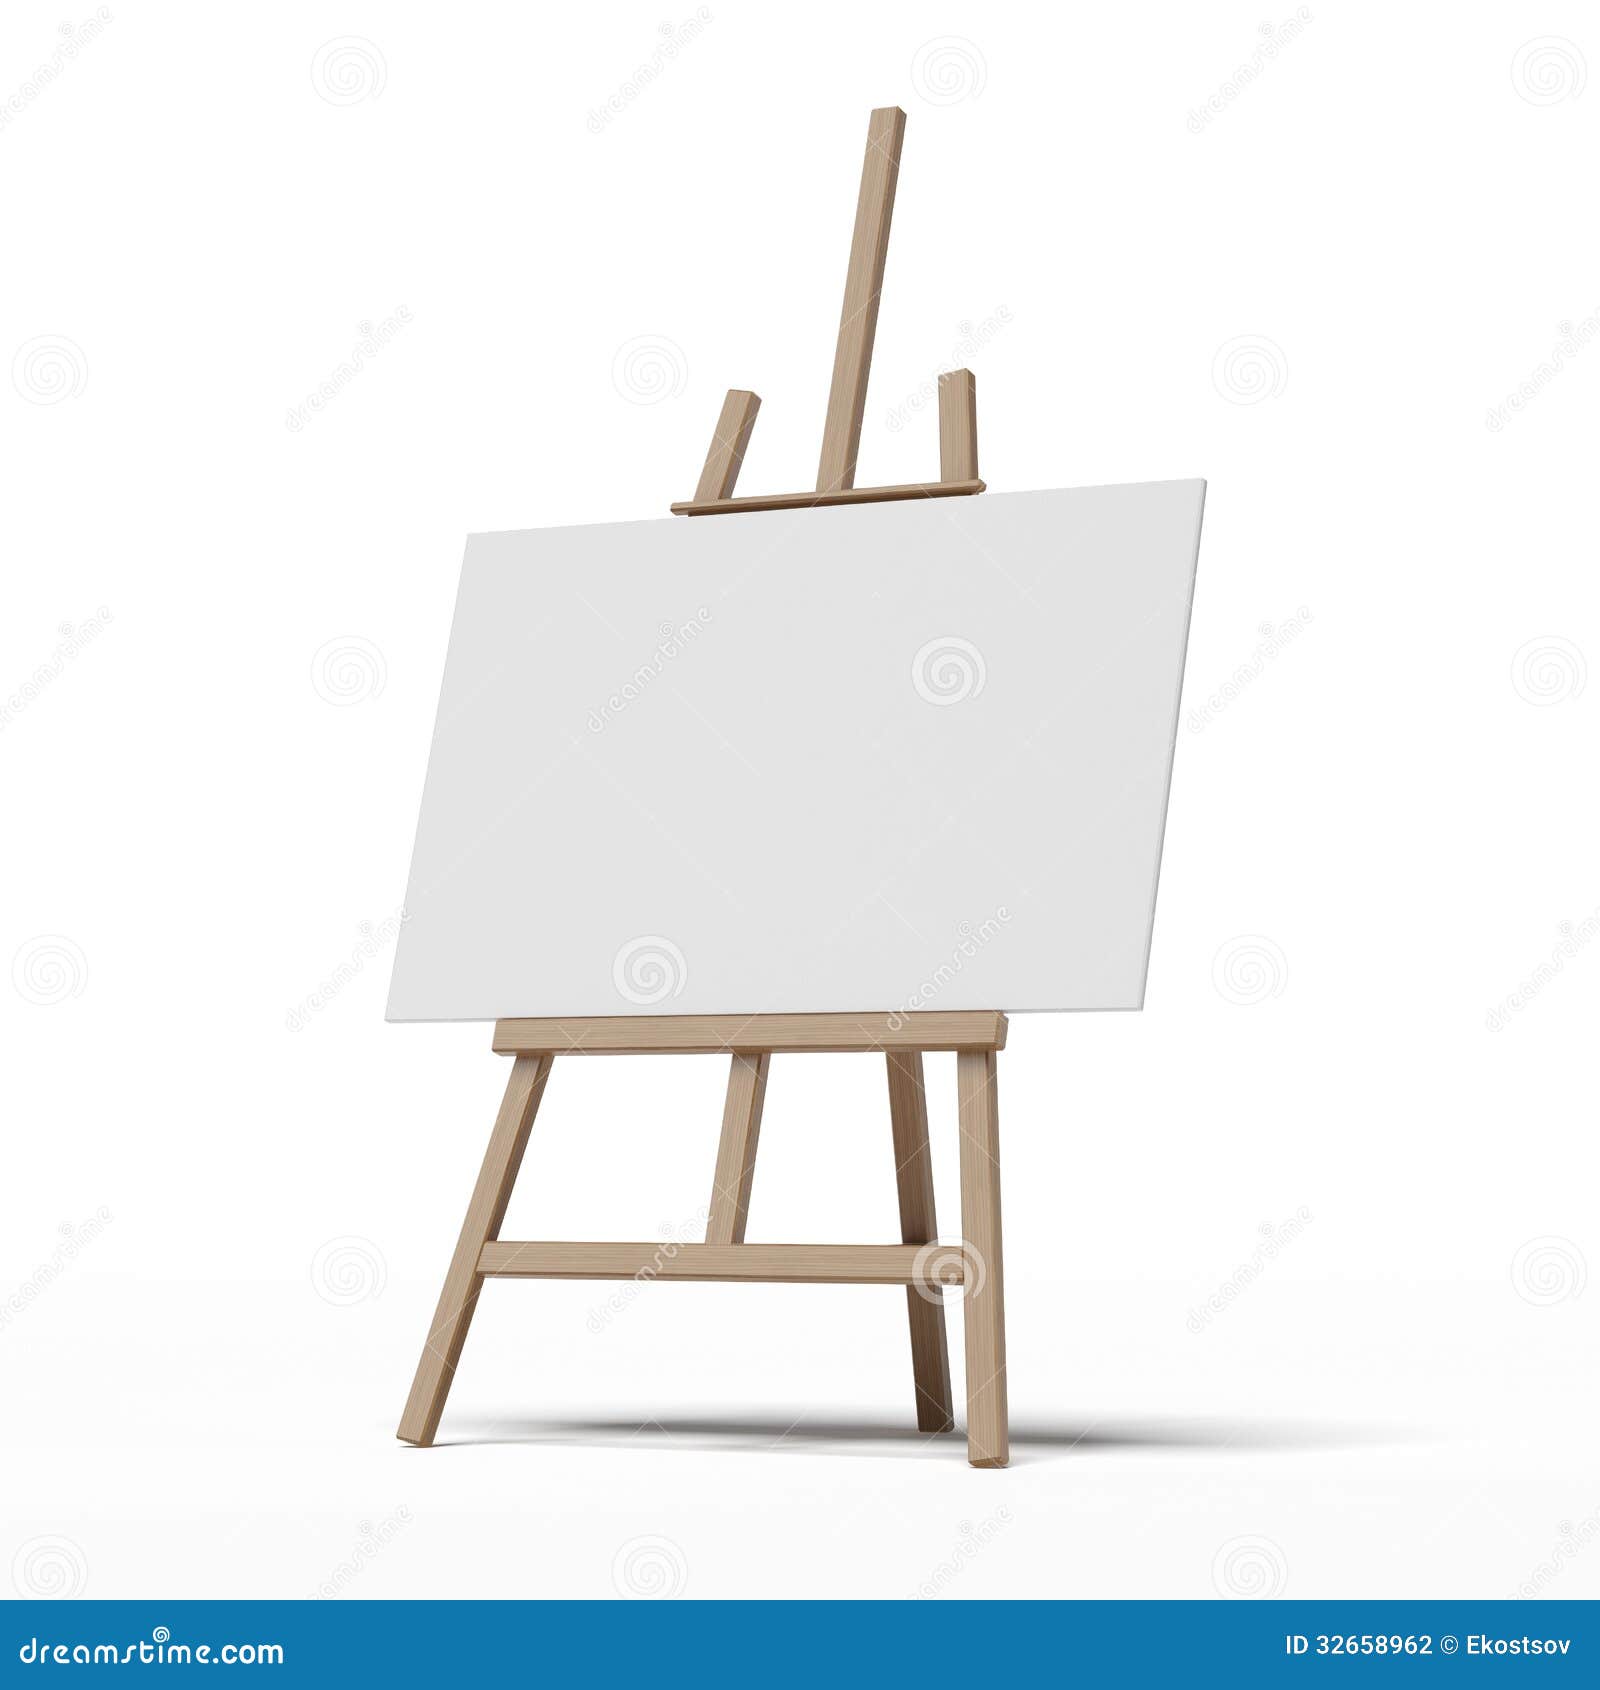 Easel with empty canvas stock illustration. Image of ...